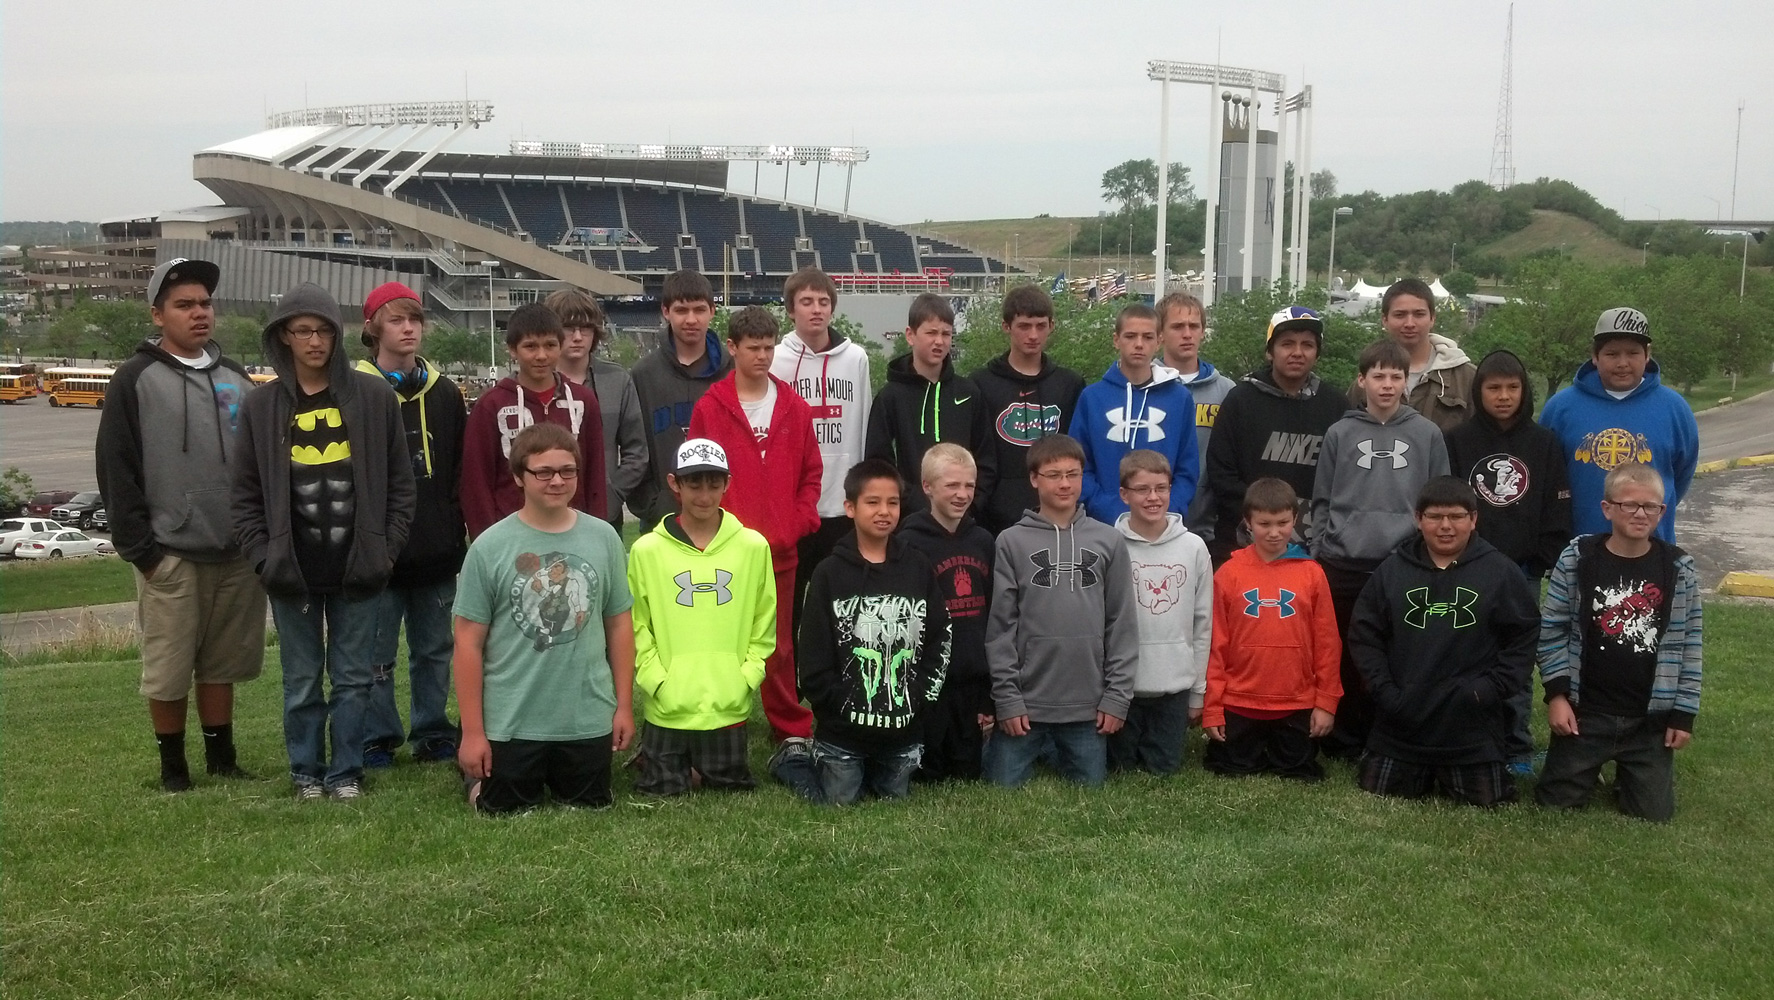 The Explorers took their annual trip to see a baseball game in May 2014. 